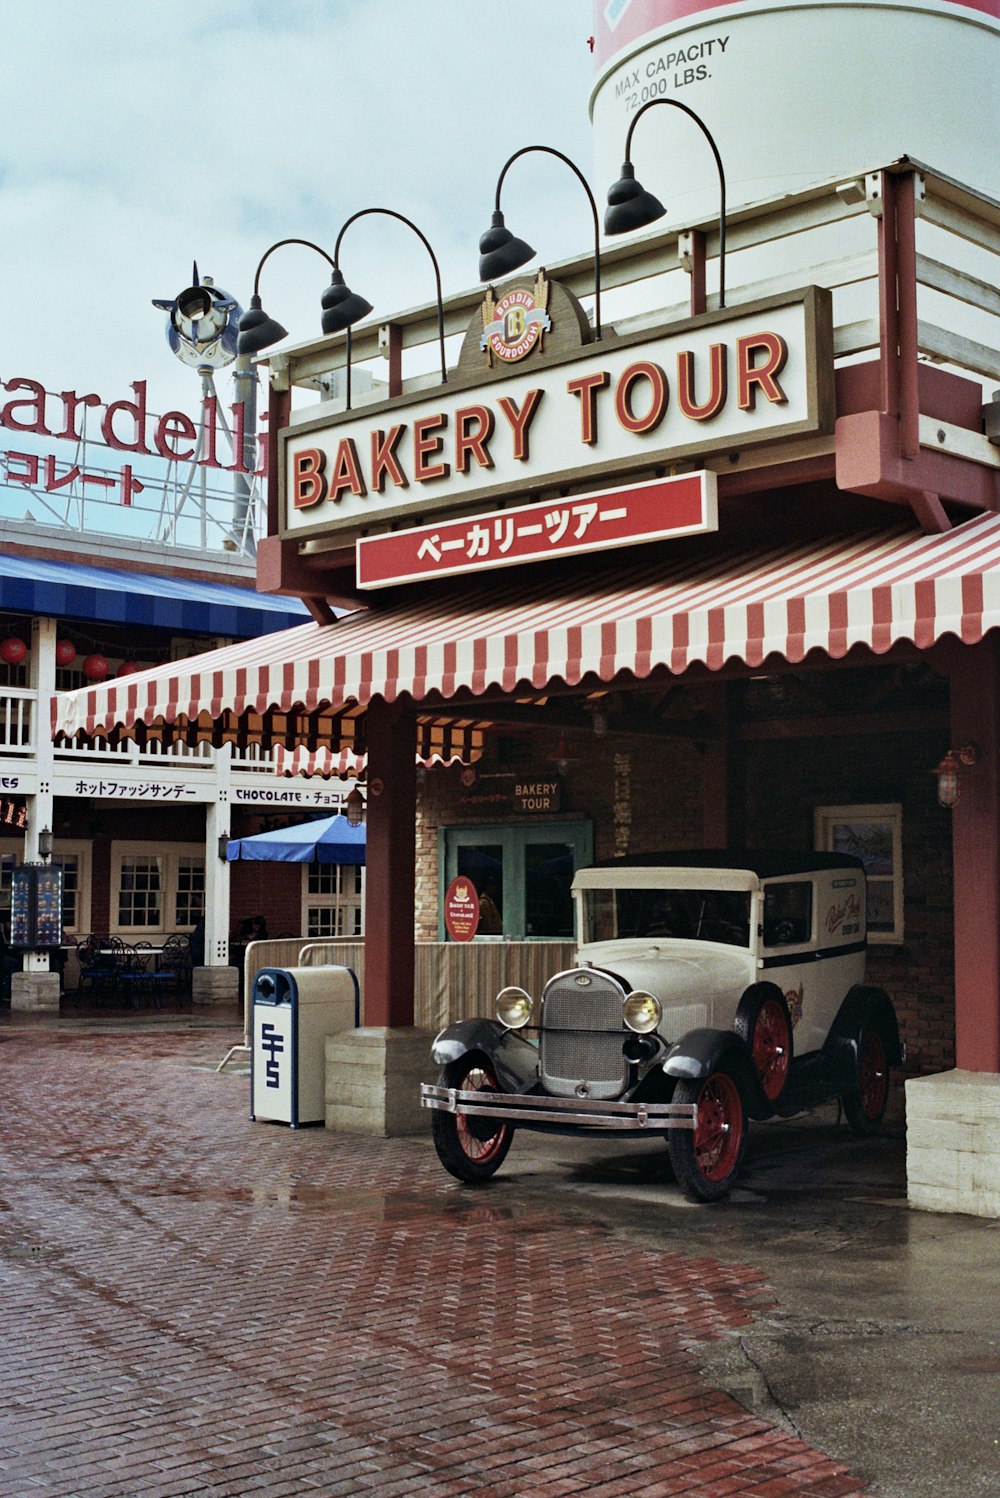 an old car is parked in front of a bakery